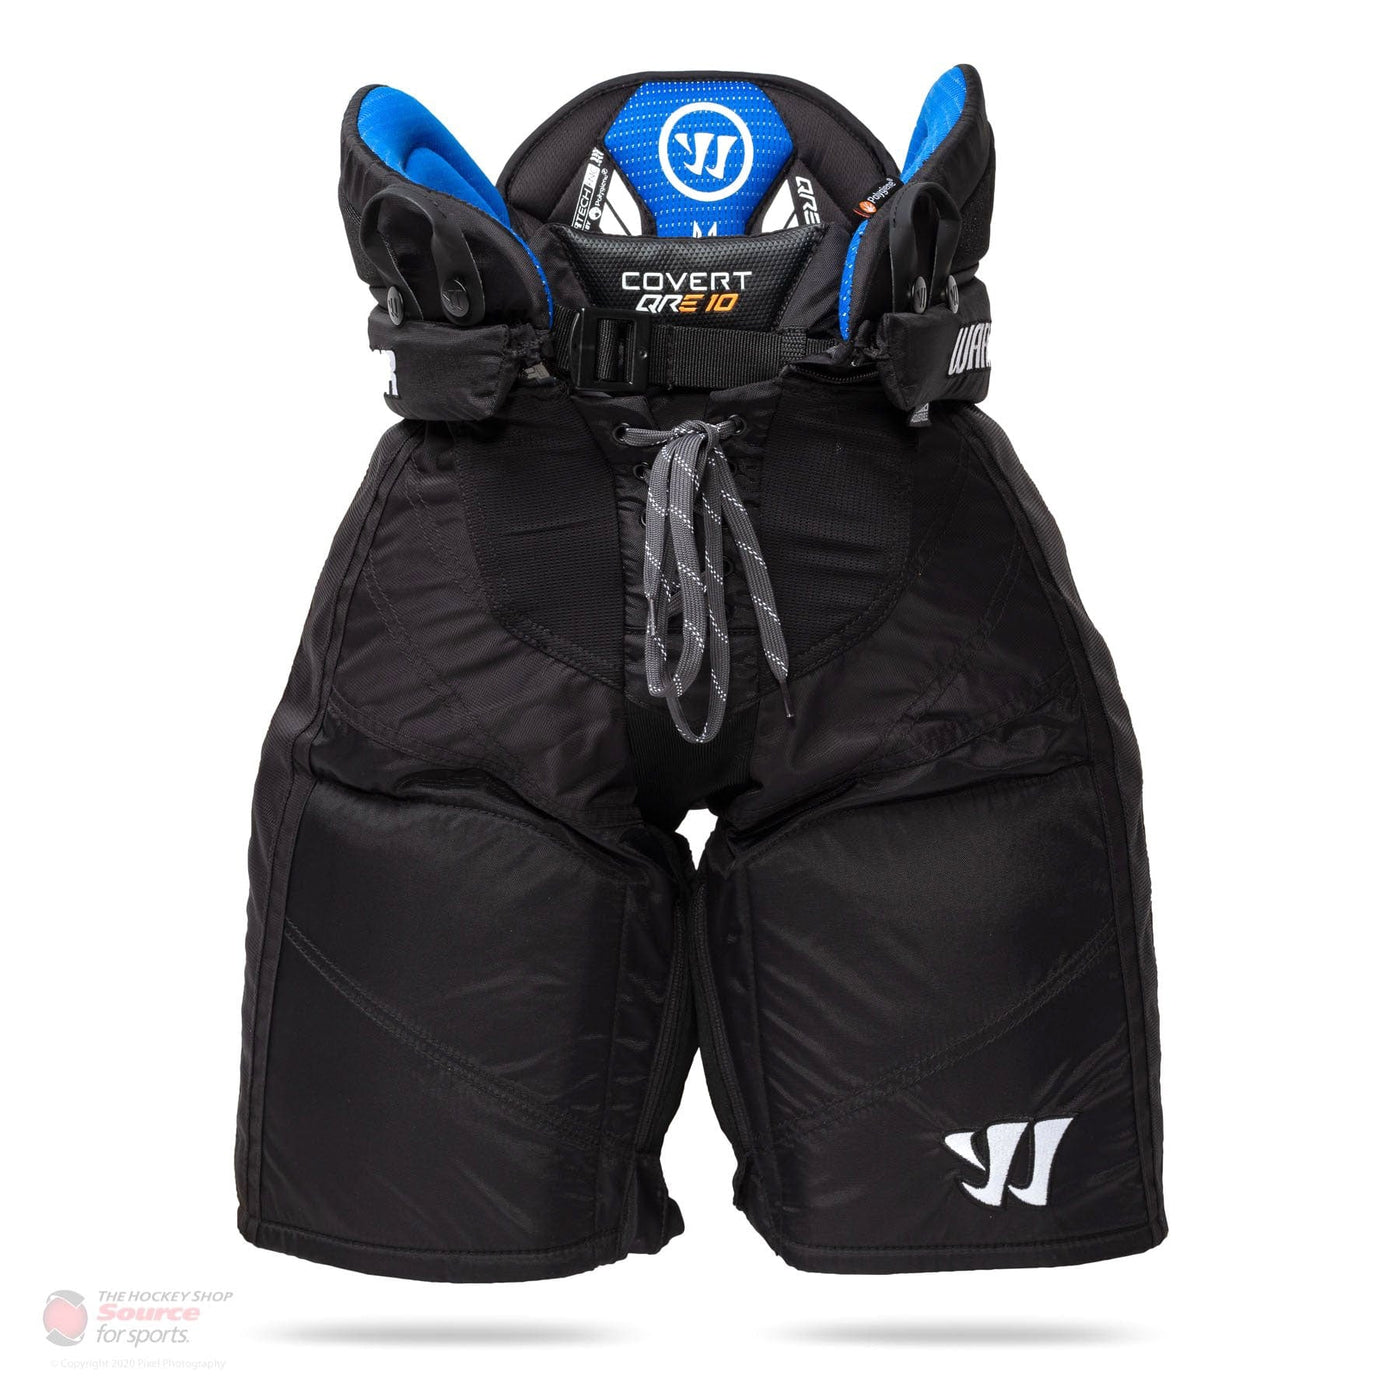 Warrior Covert QRE 10 Youth Hockey Pants